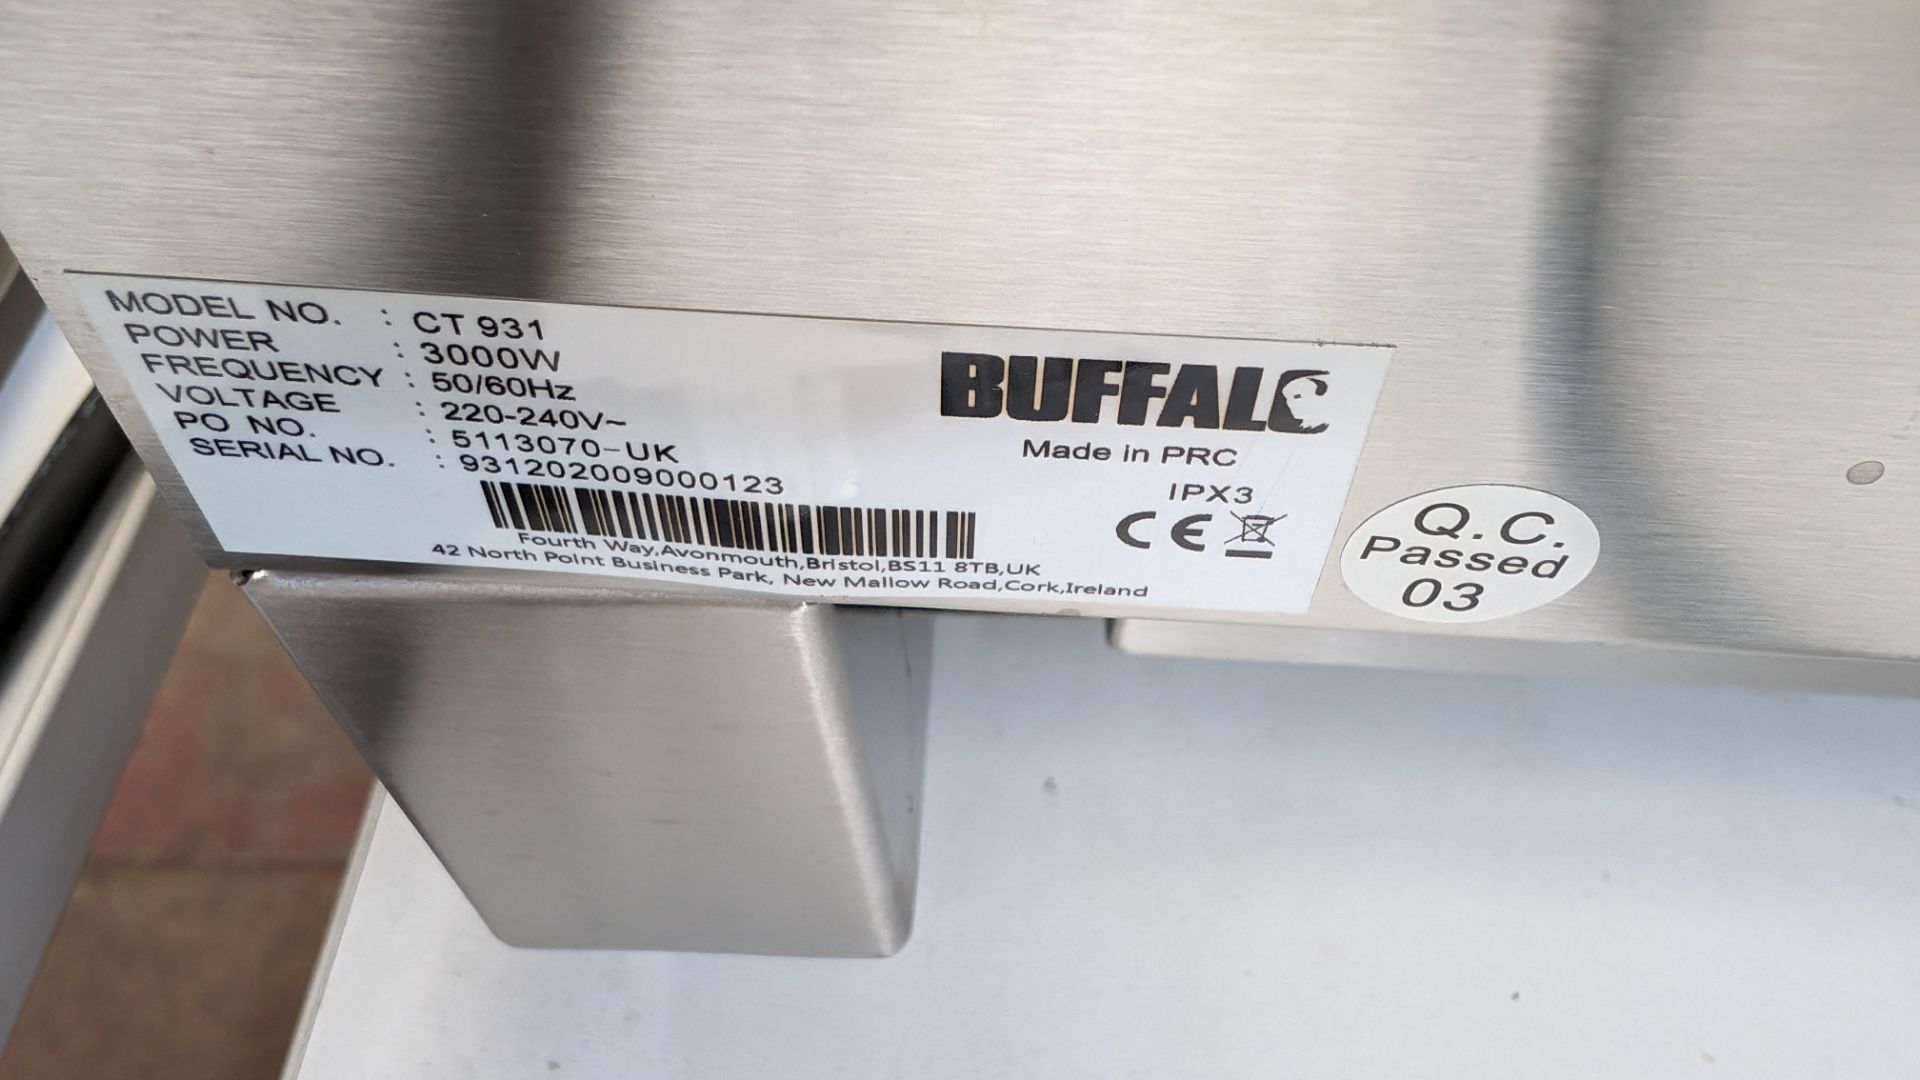 Buffalo stainless steel commercial crepe maker, model CT931 - Image 3 of 4